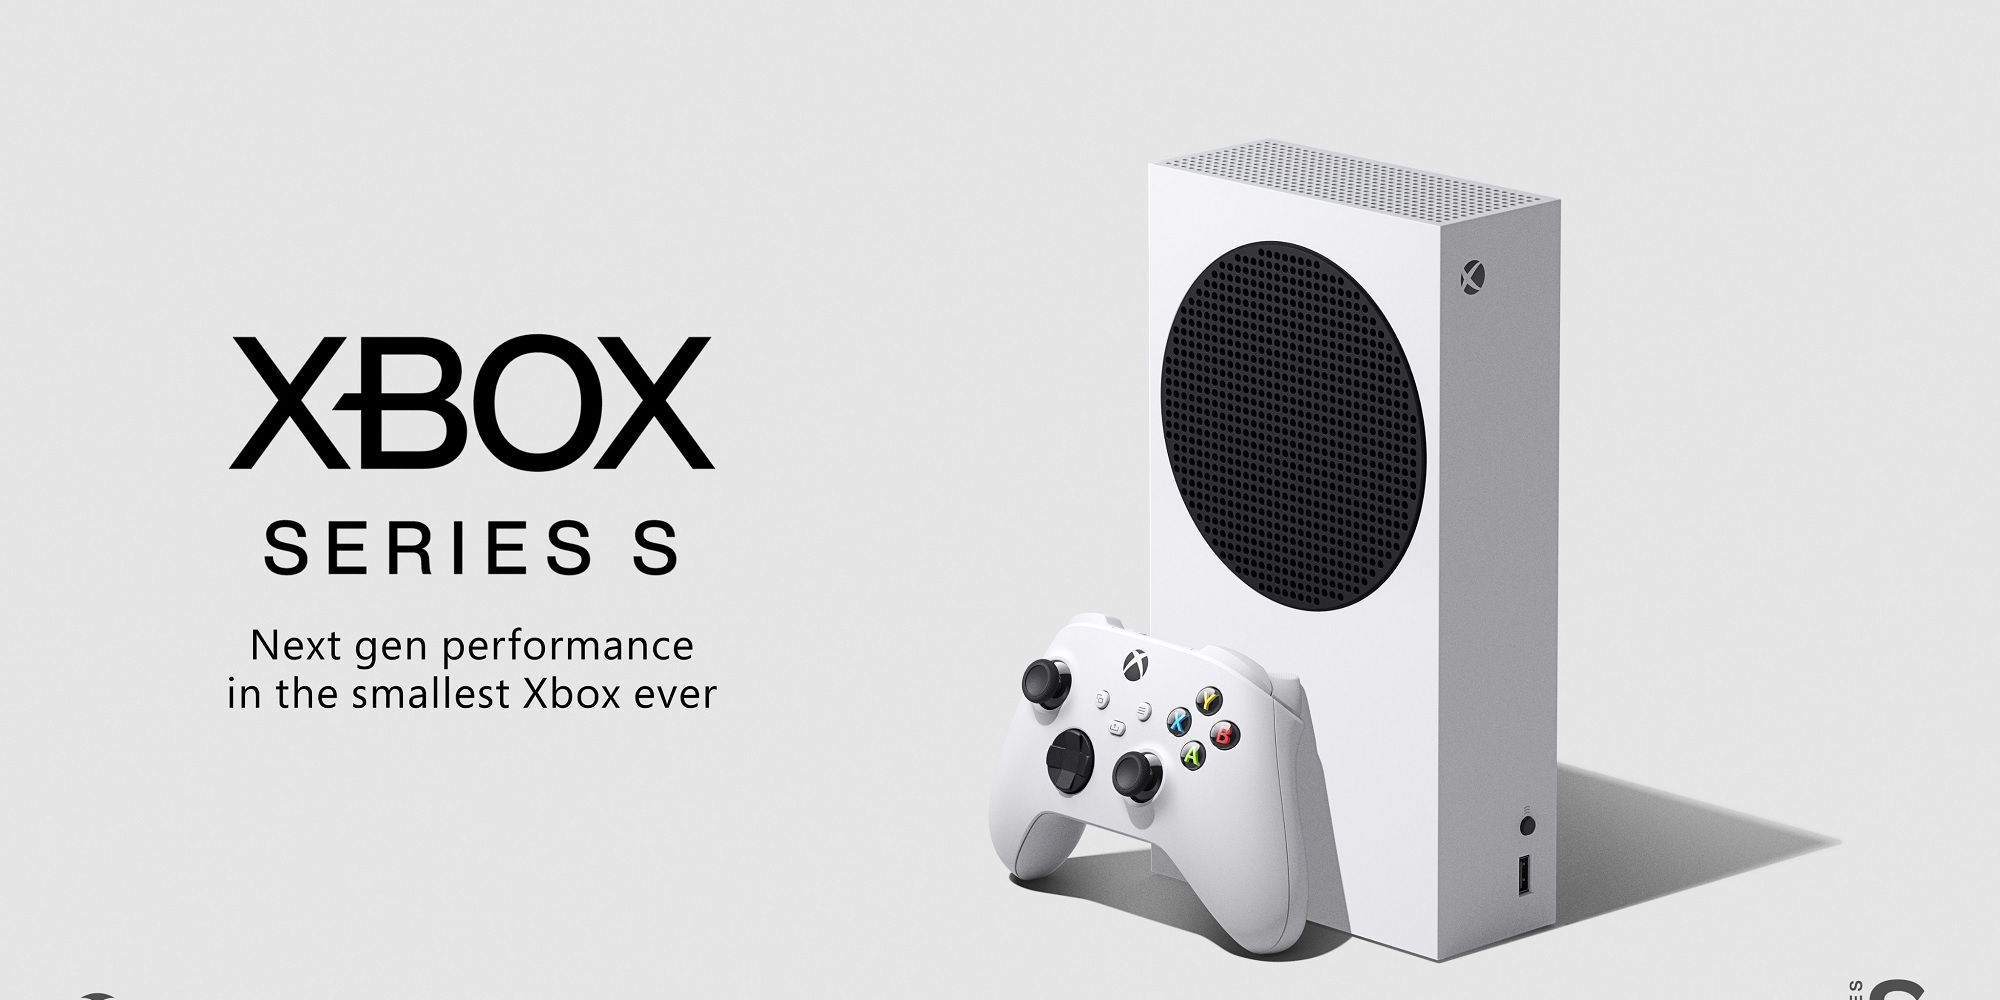 Official announcement image for Microsoft's Xbox Series S.